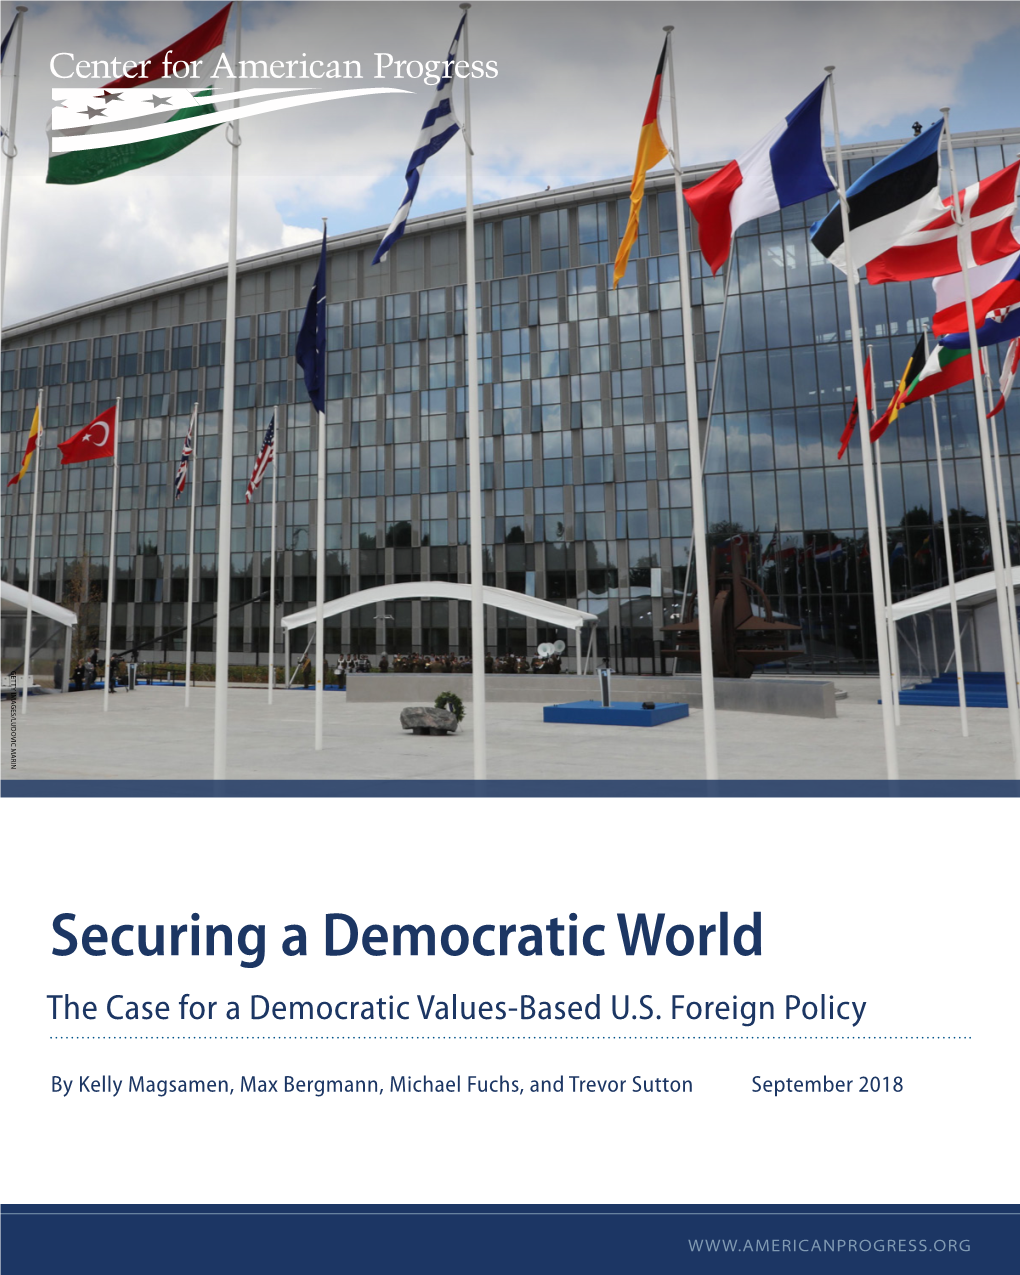 Securing a Democratic World the Case for a Democratic Values-Based U.S